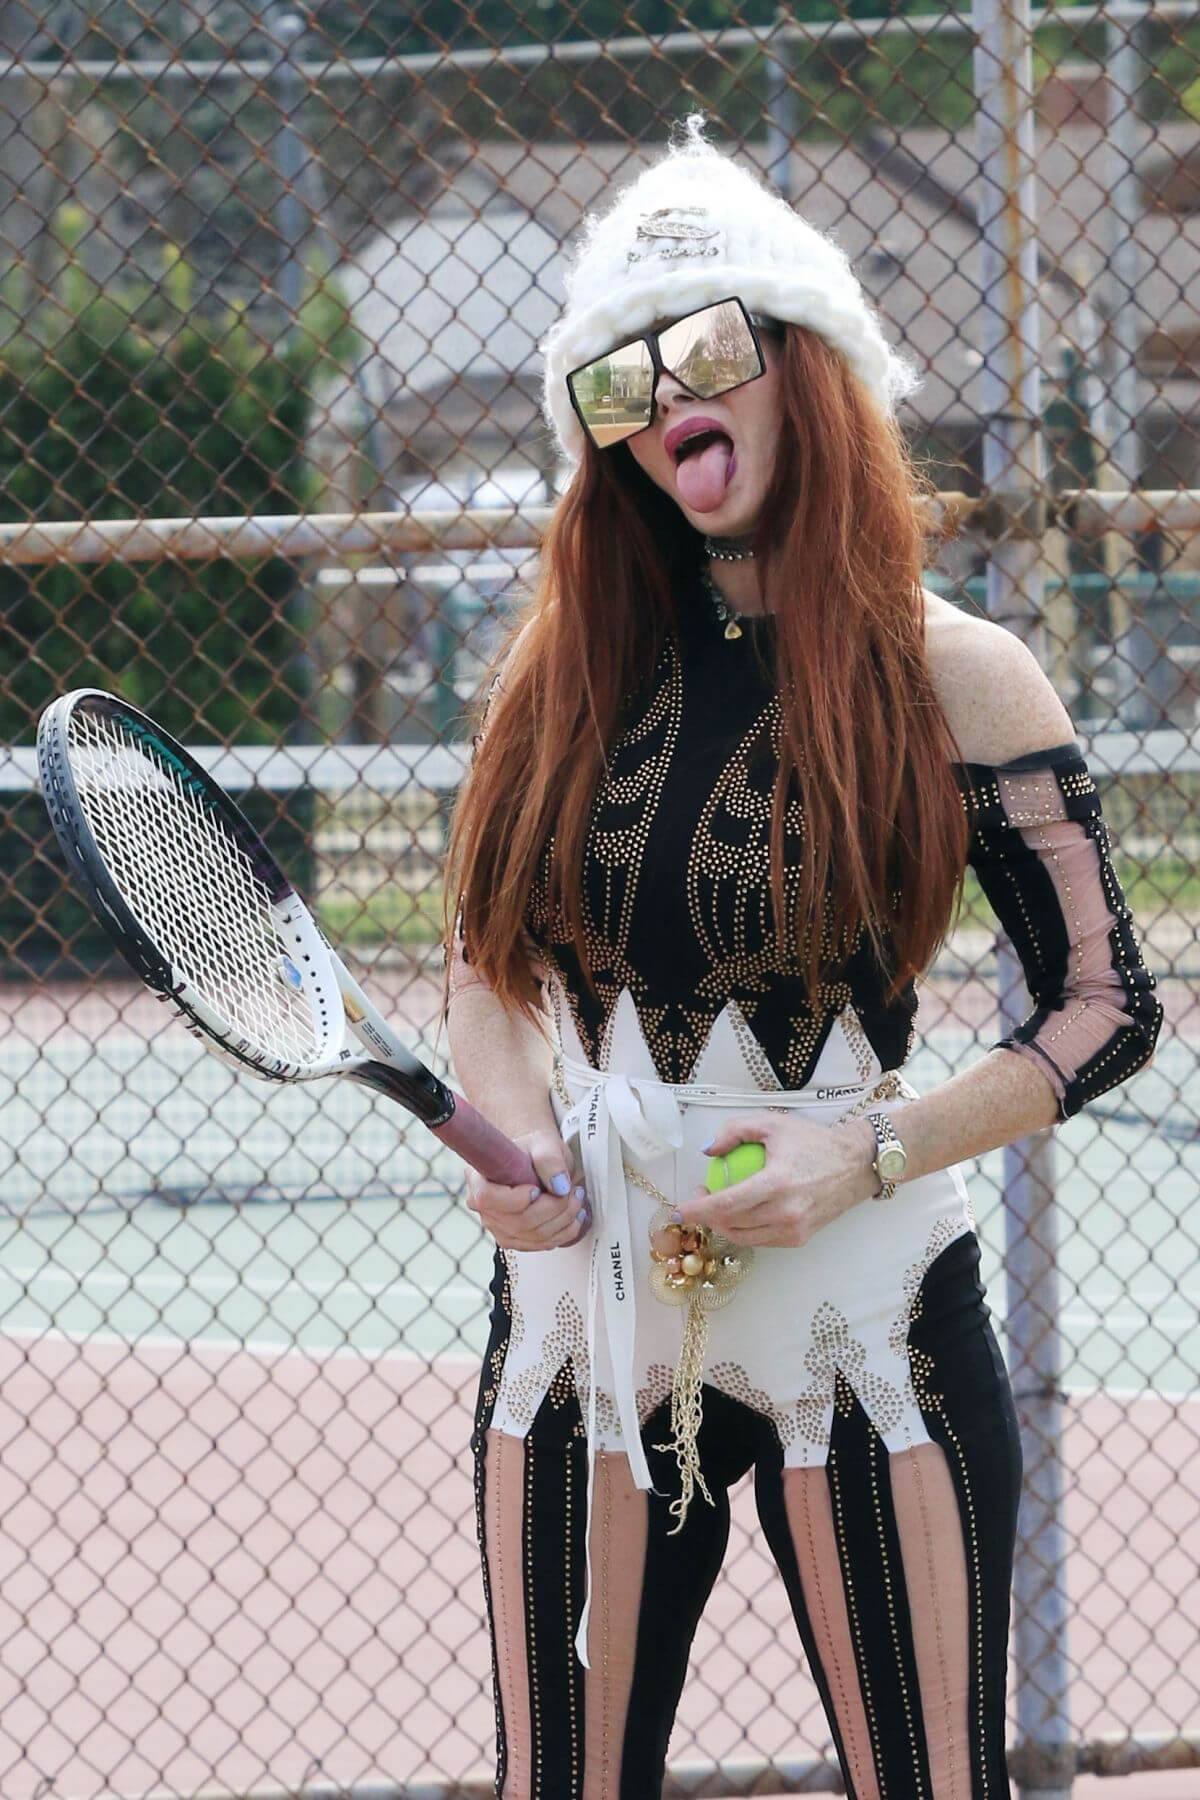 Phoebe Price Seen at a Tennis Courts and Wells Fargo ATM 03/19/2021